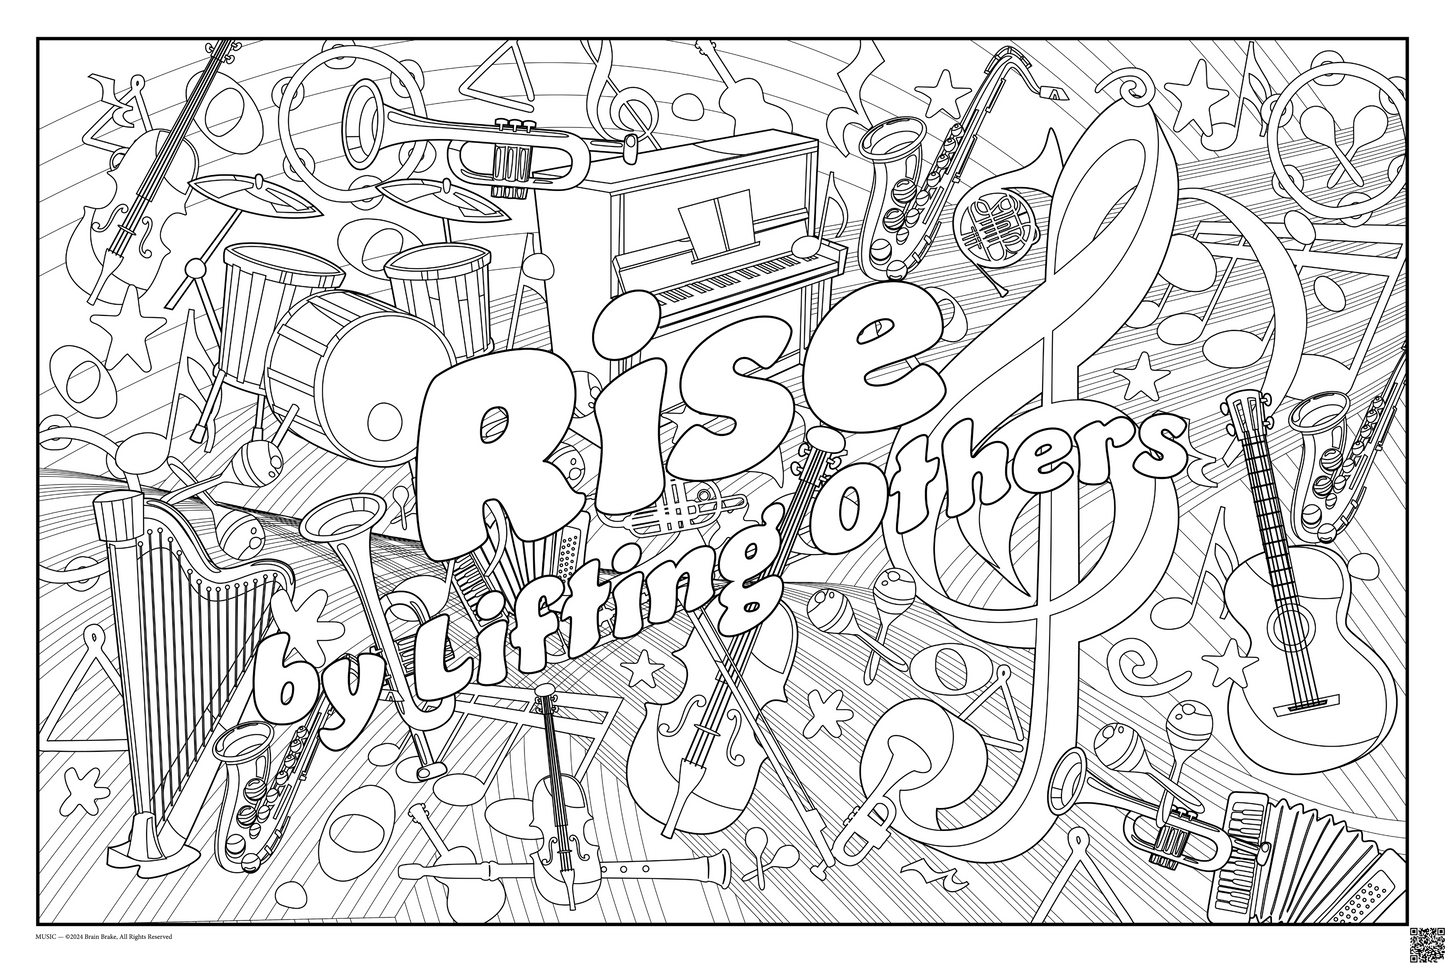 Build Community: Rise by Lifting Others